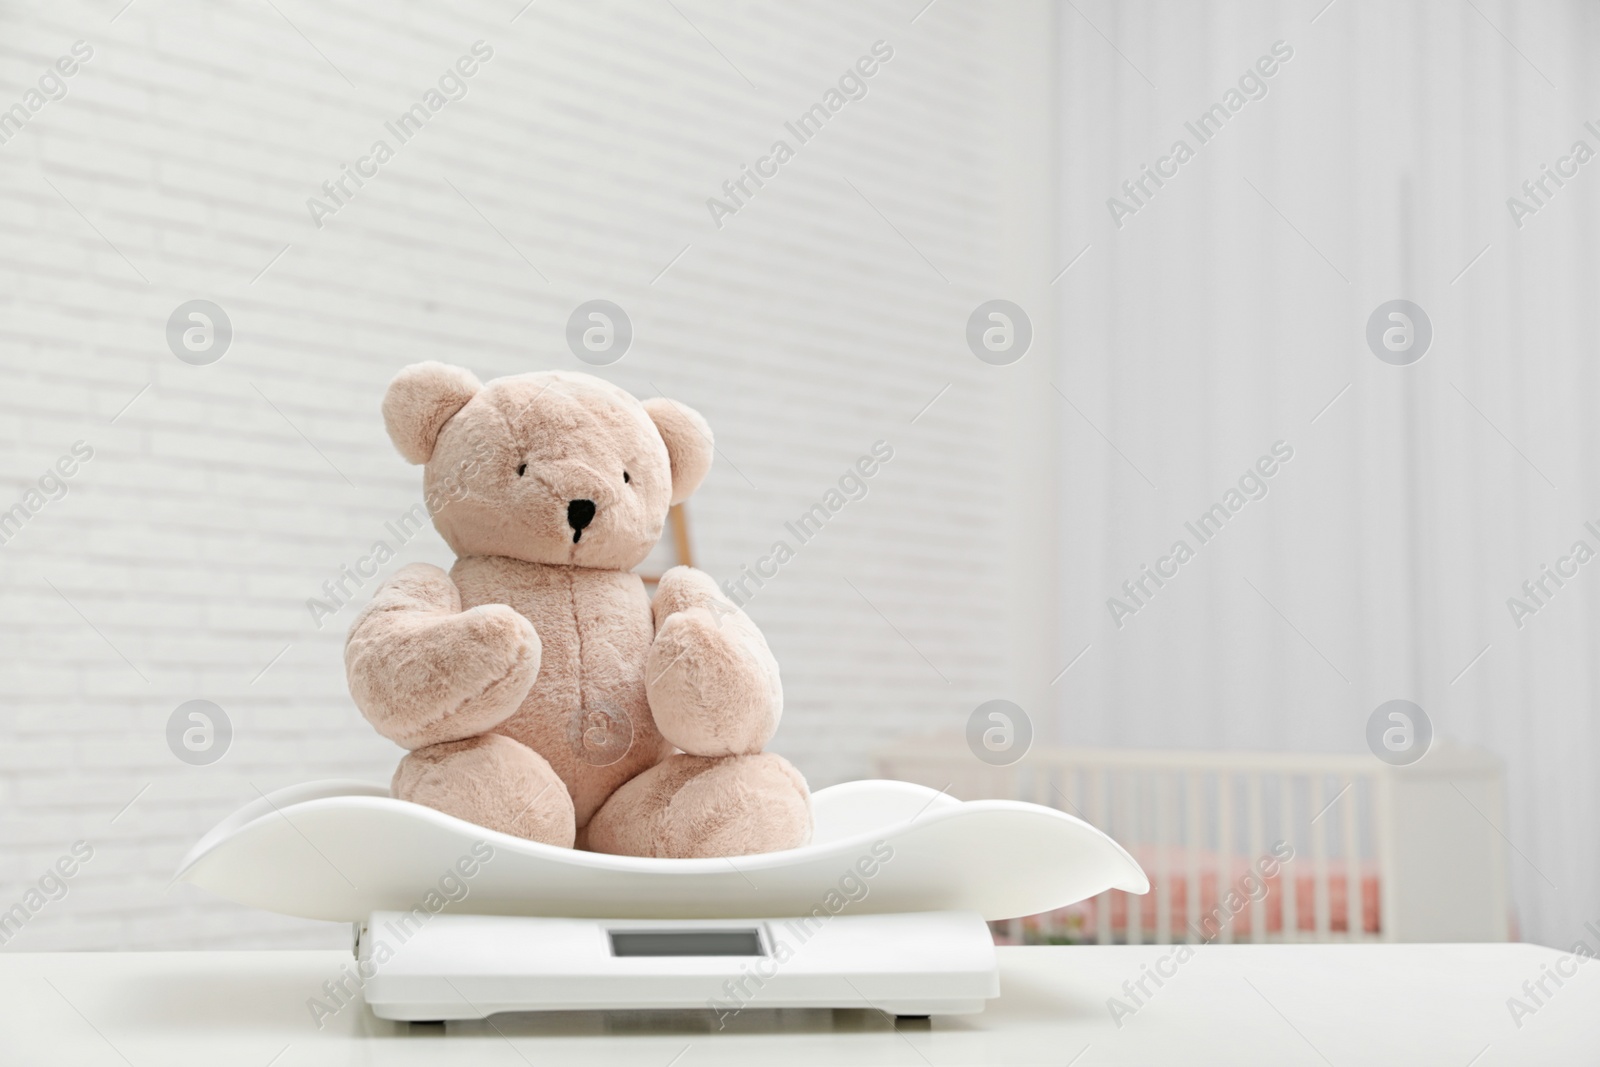 Photo of Baby scales with teddy bear on table in light room. Space for text